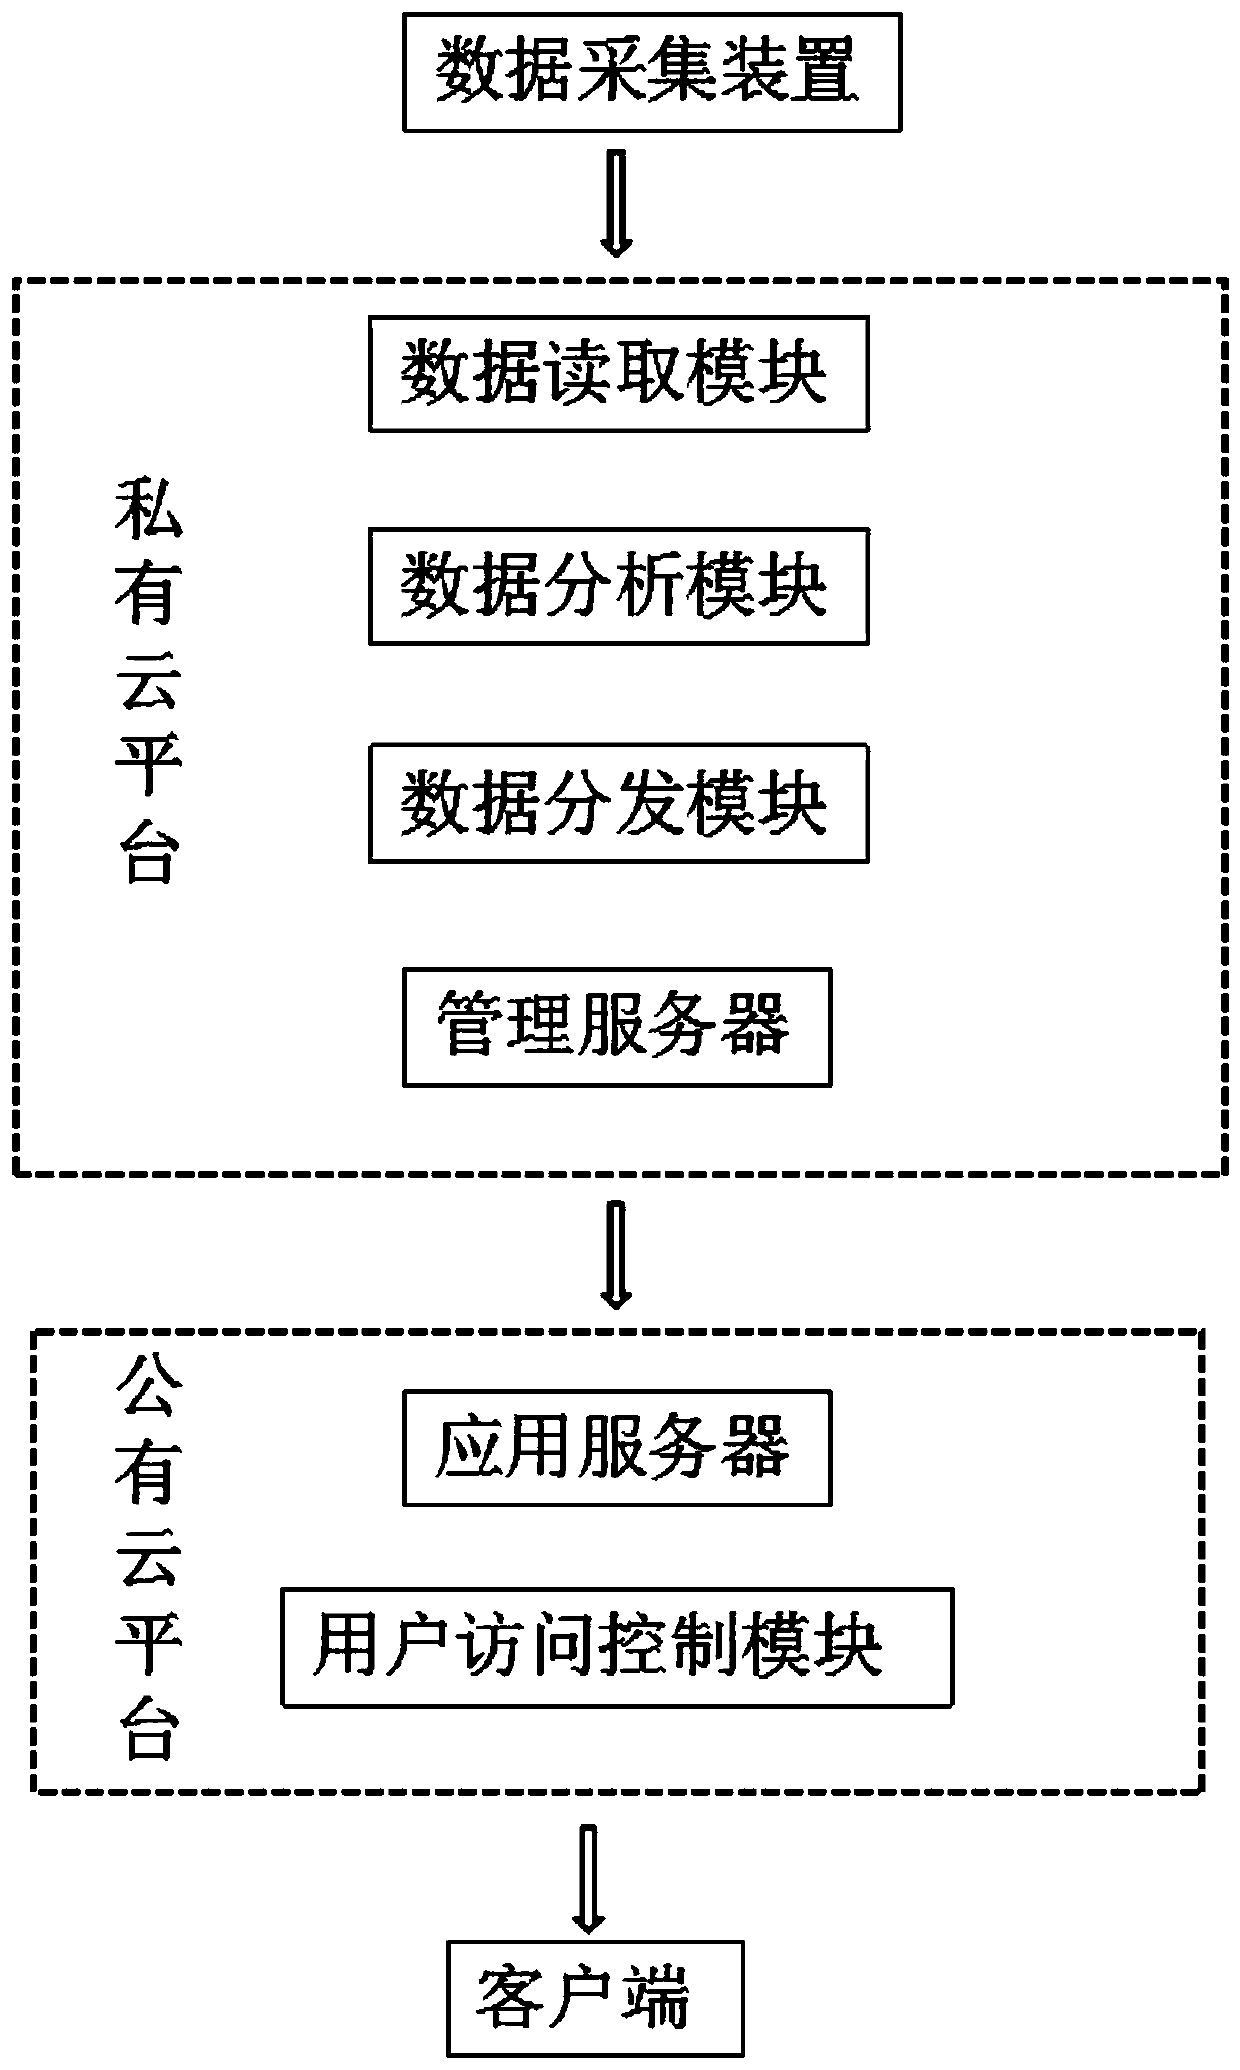 Data transmission center and method based on private cloud